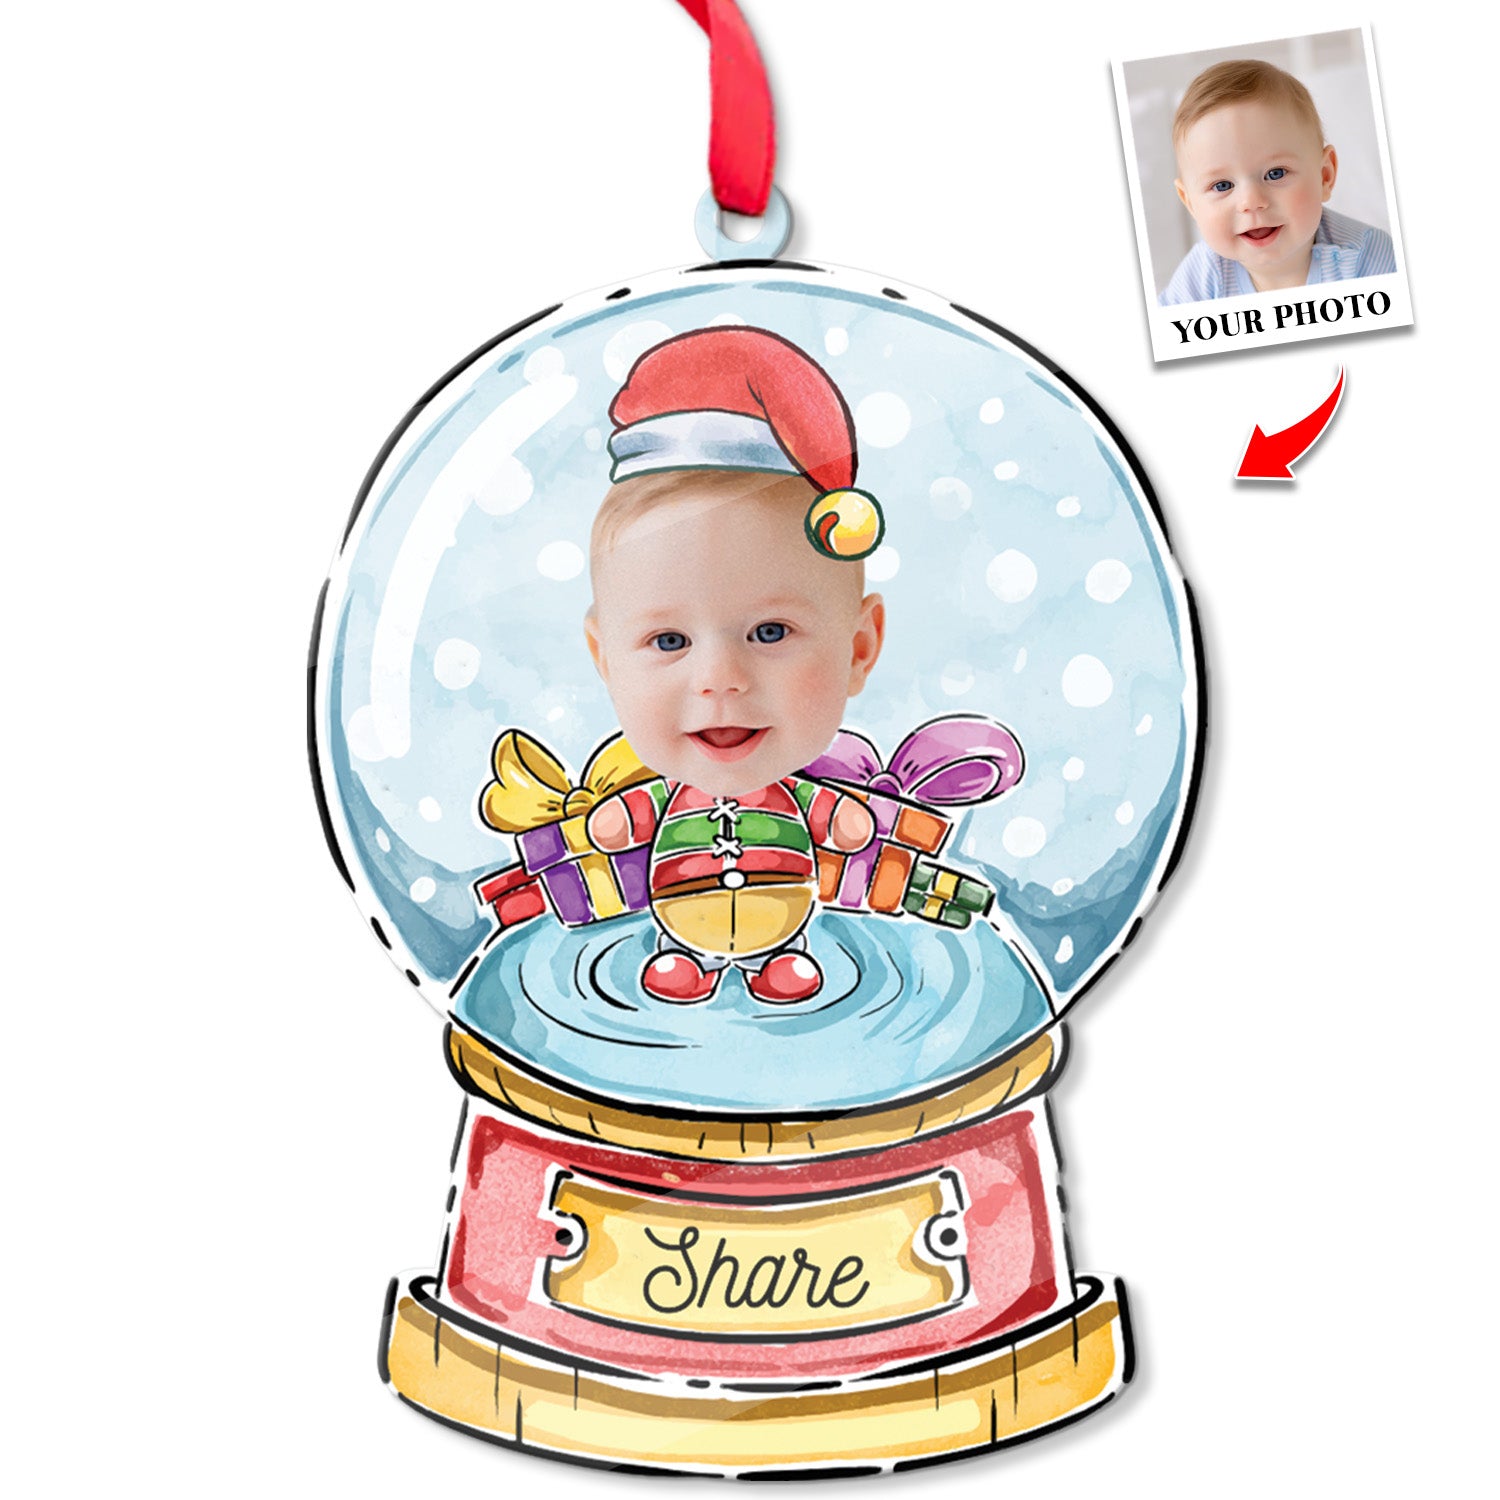 Face From Photo, Ornament For Baby, Christmas Crystal Balls, Personalized Name And Text, Christmas Shape Ornament 2 Sides